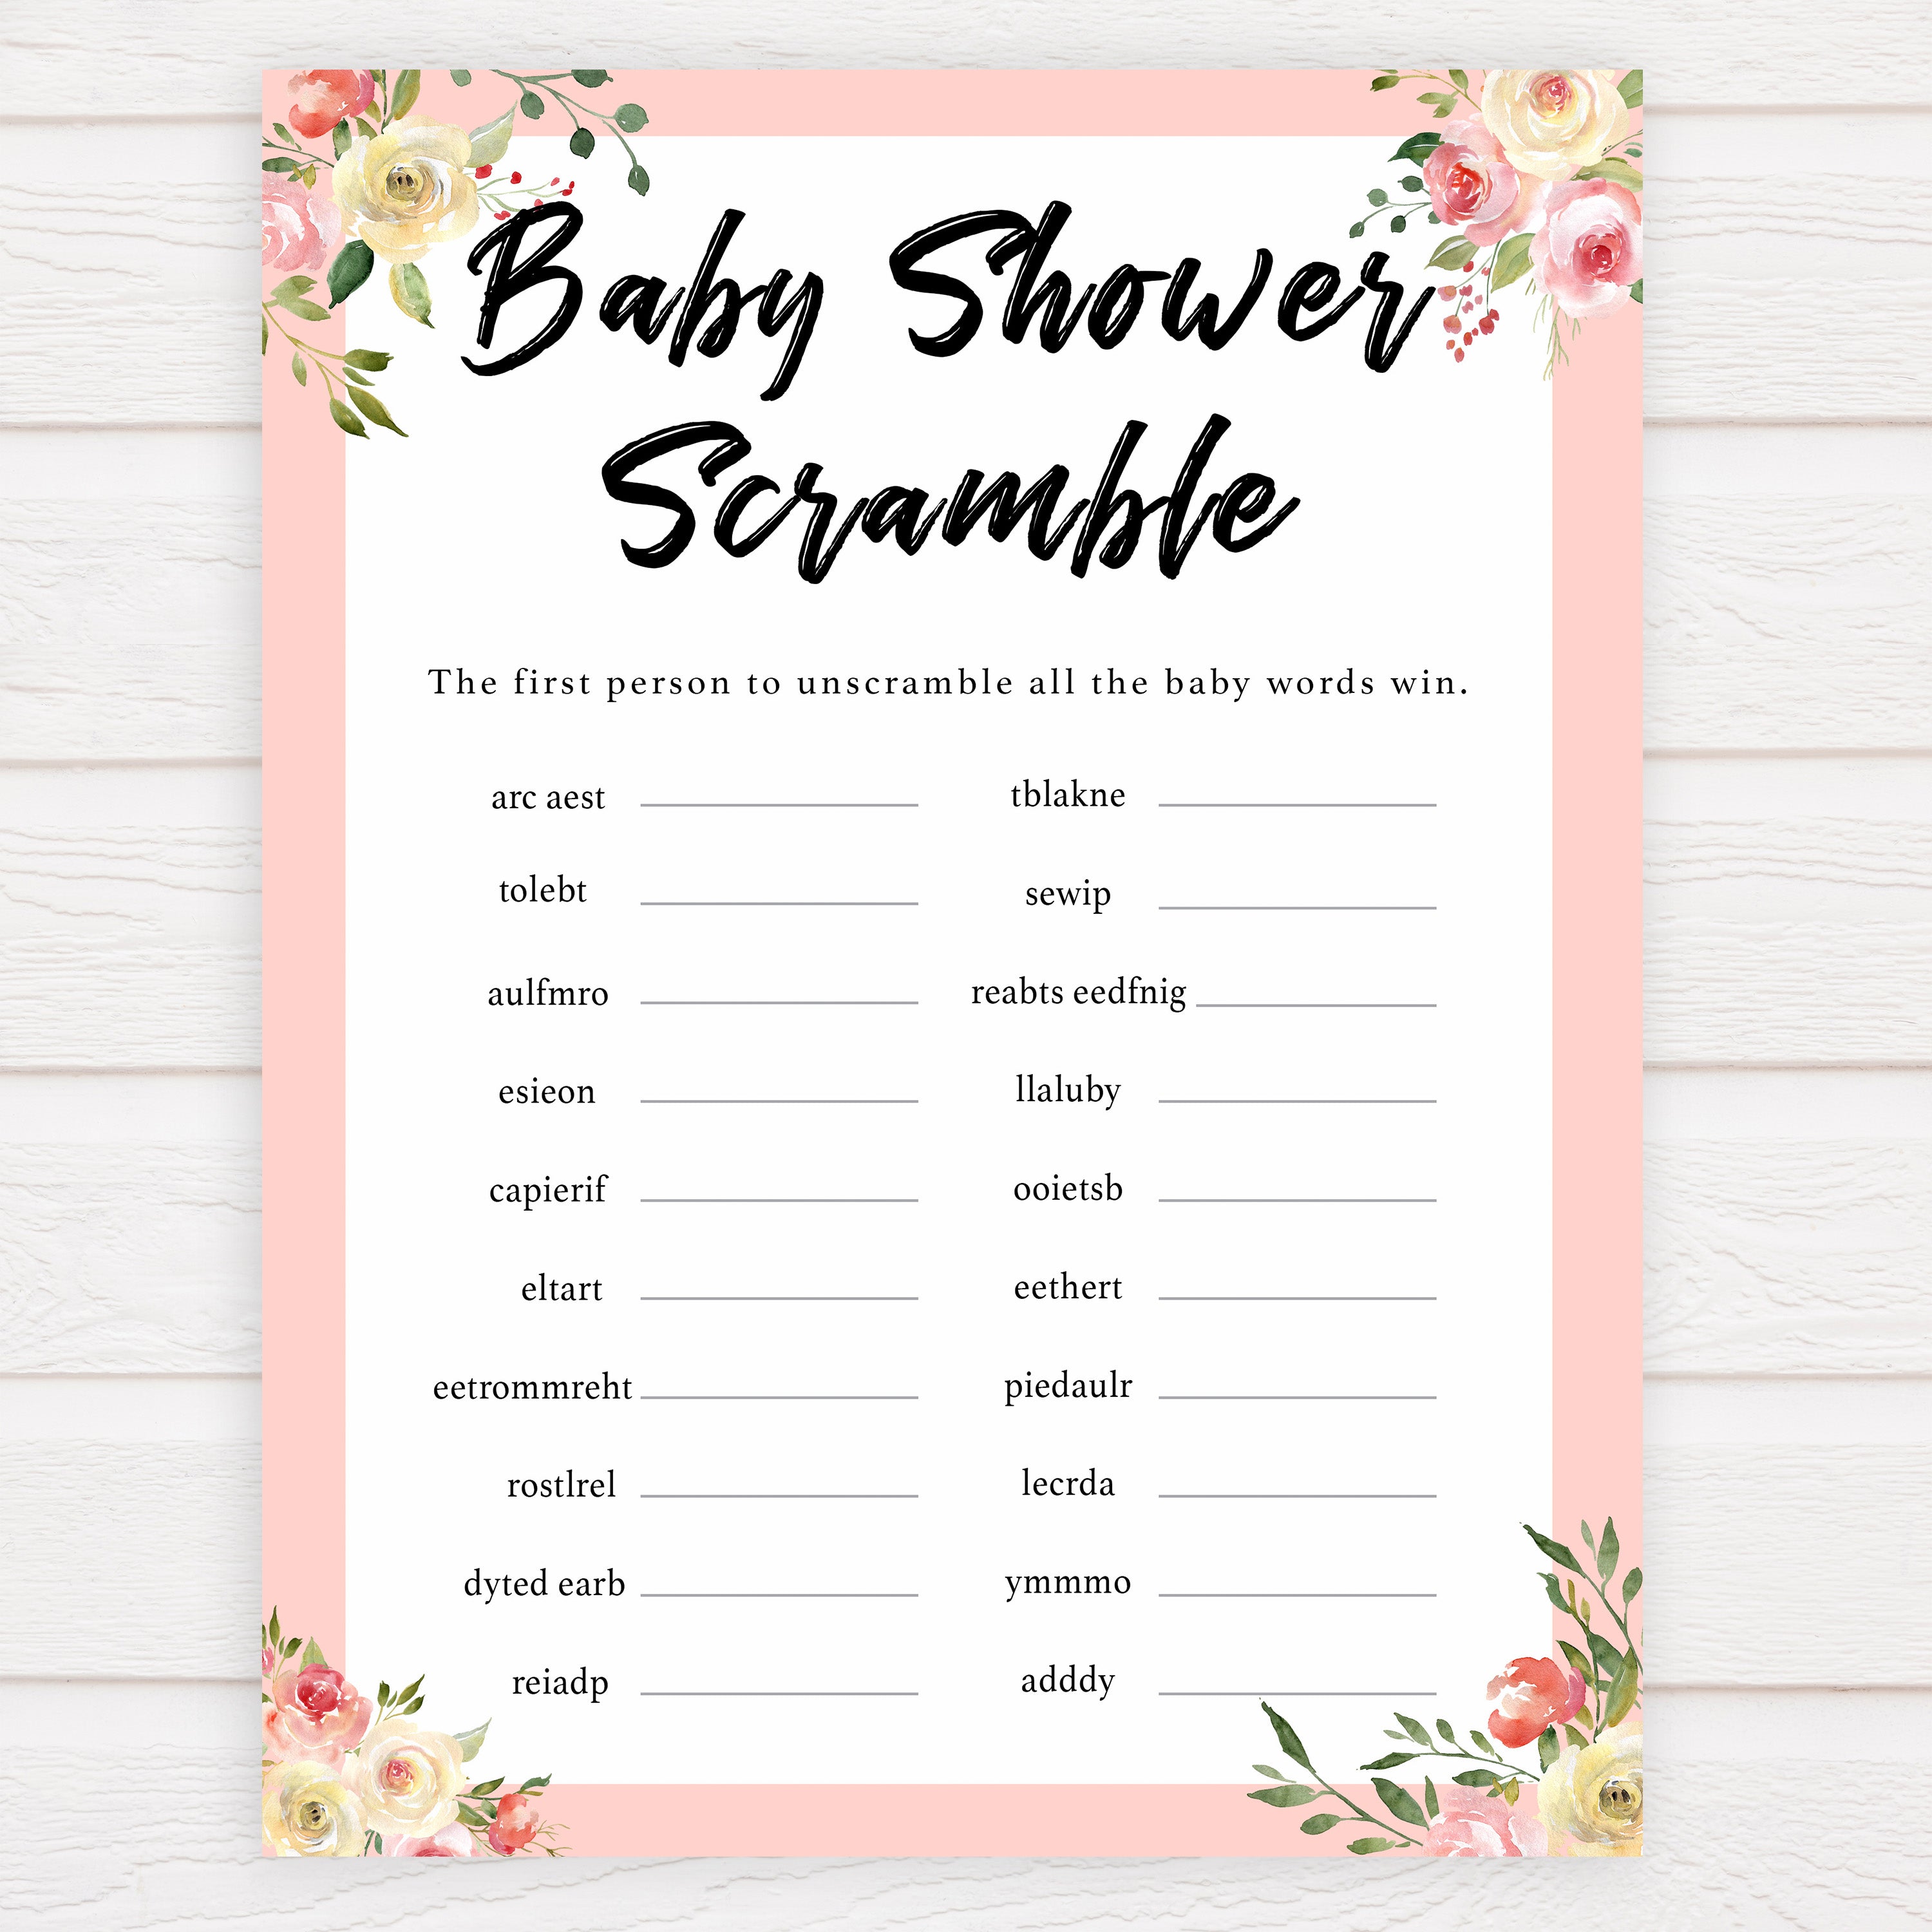 spring floral baby scramble baby shower games, printable baby shower games, fun baby shower games, baby shower games, popular baby shower games